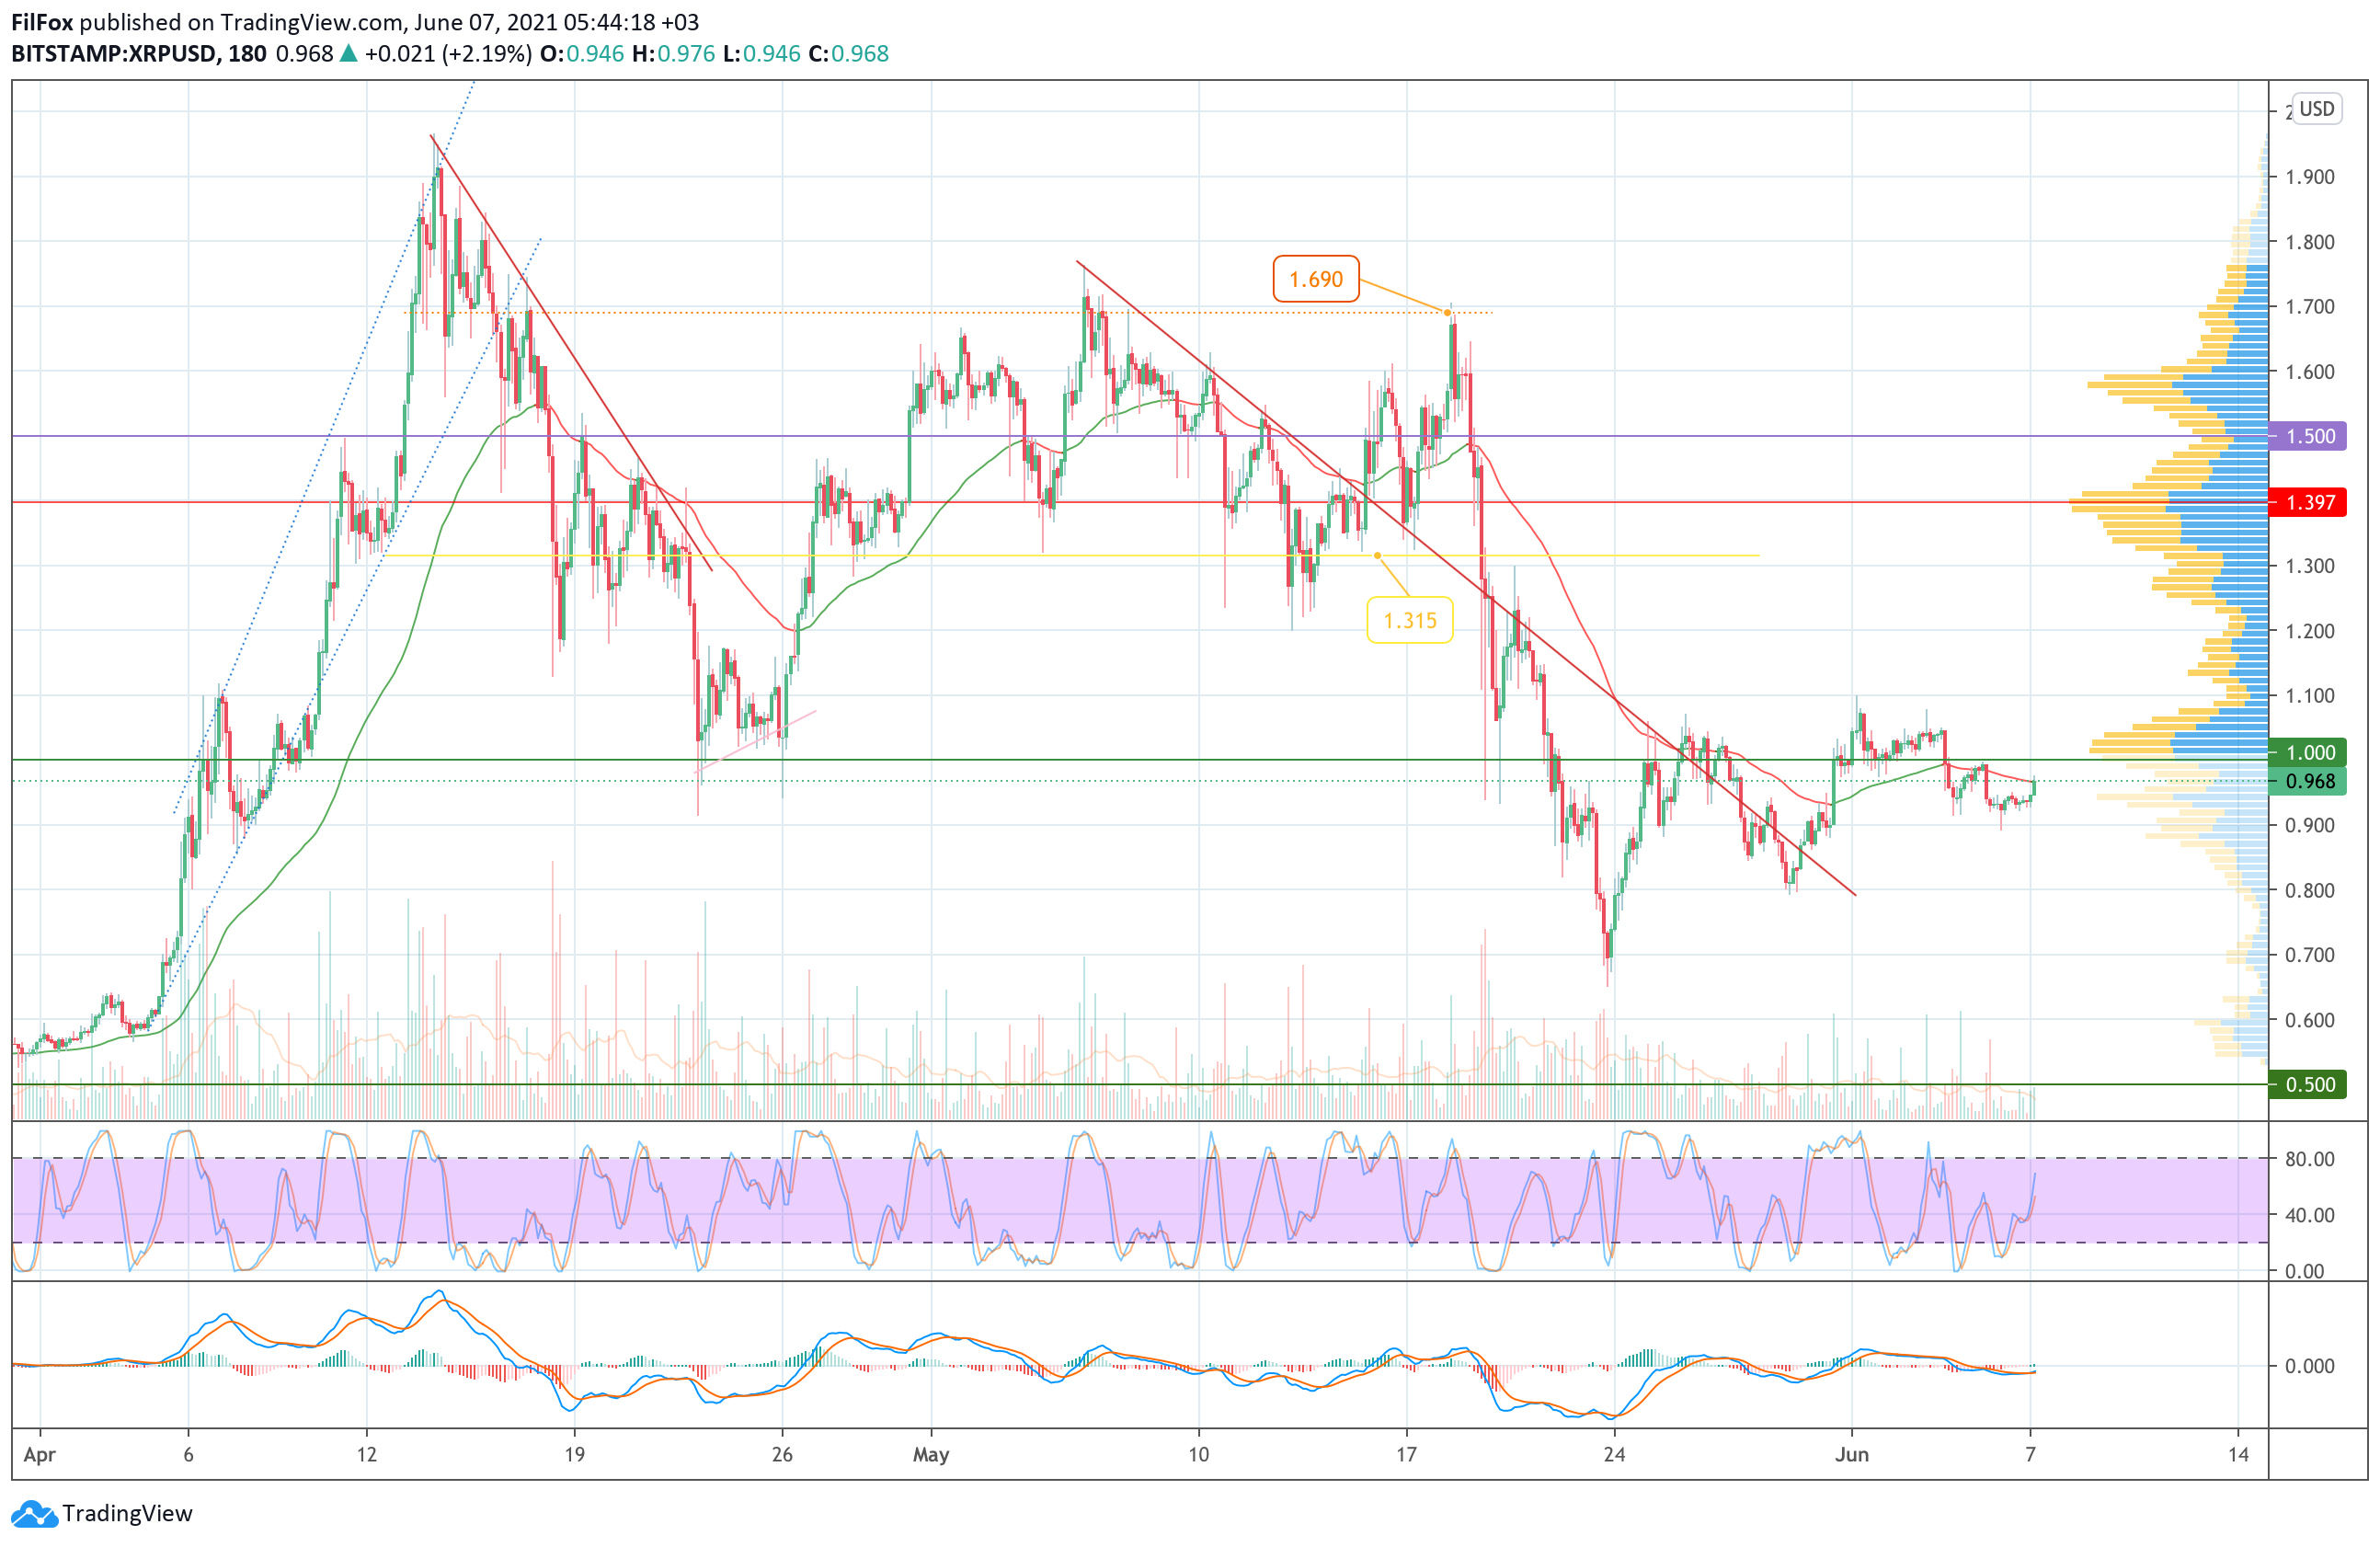 Analysis of prices for Bitcoin, Ethereum, XRP for 06/07/2021